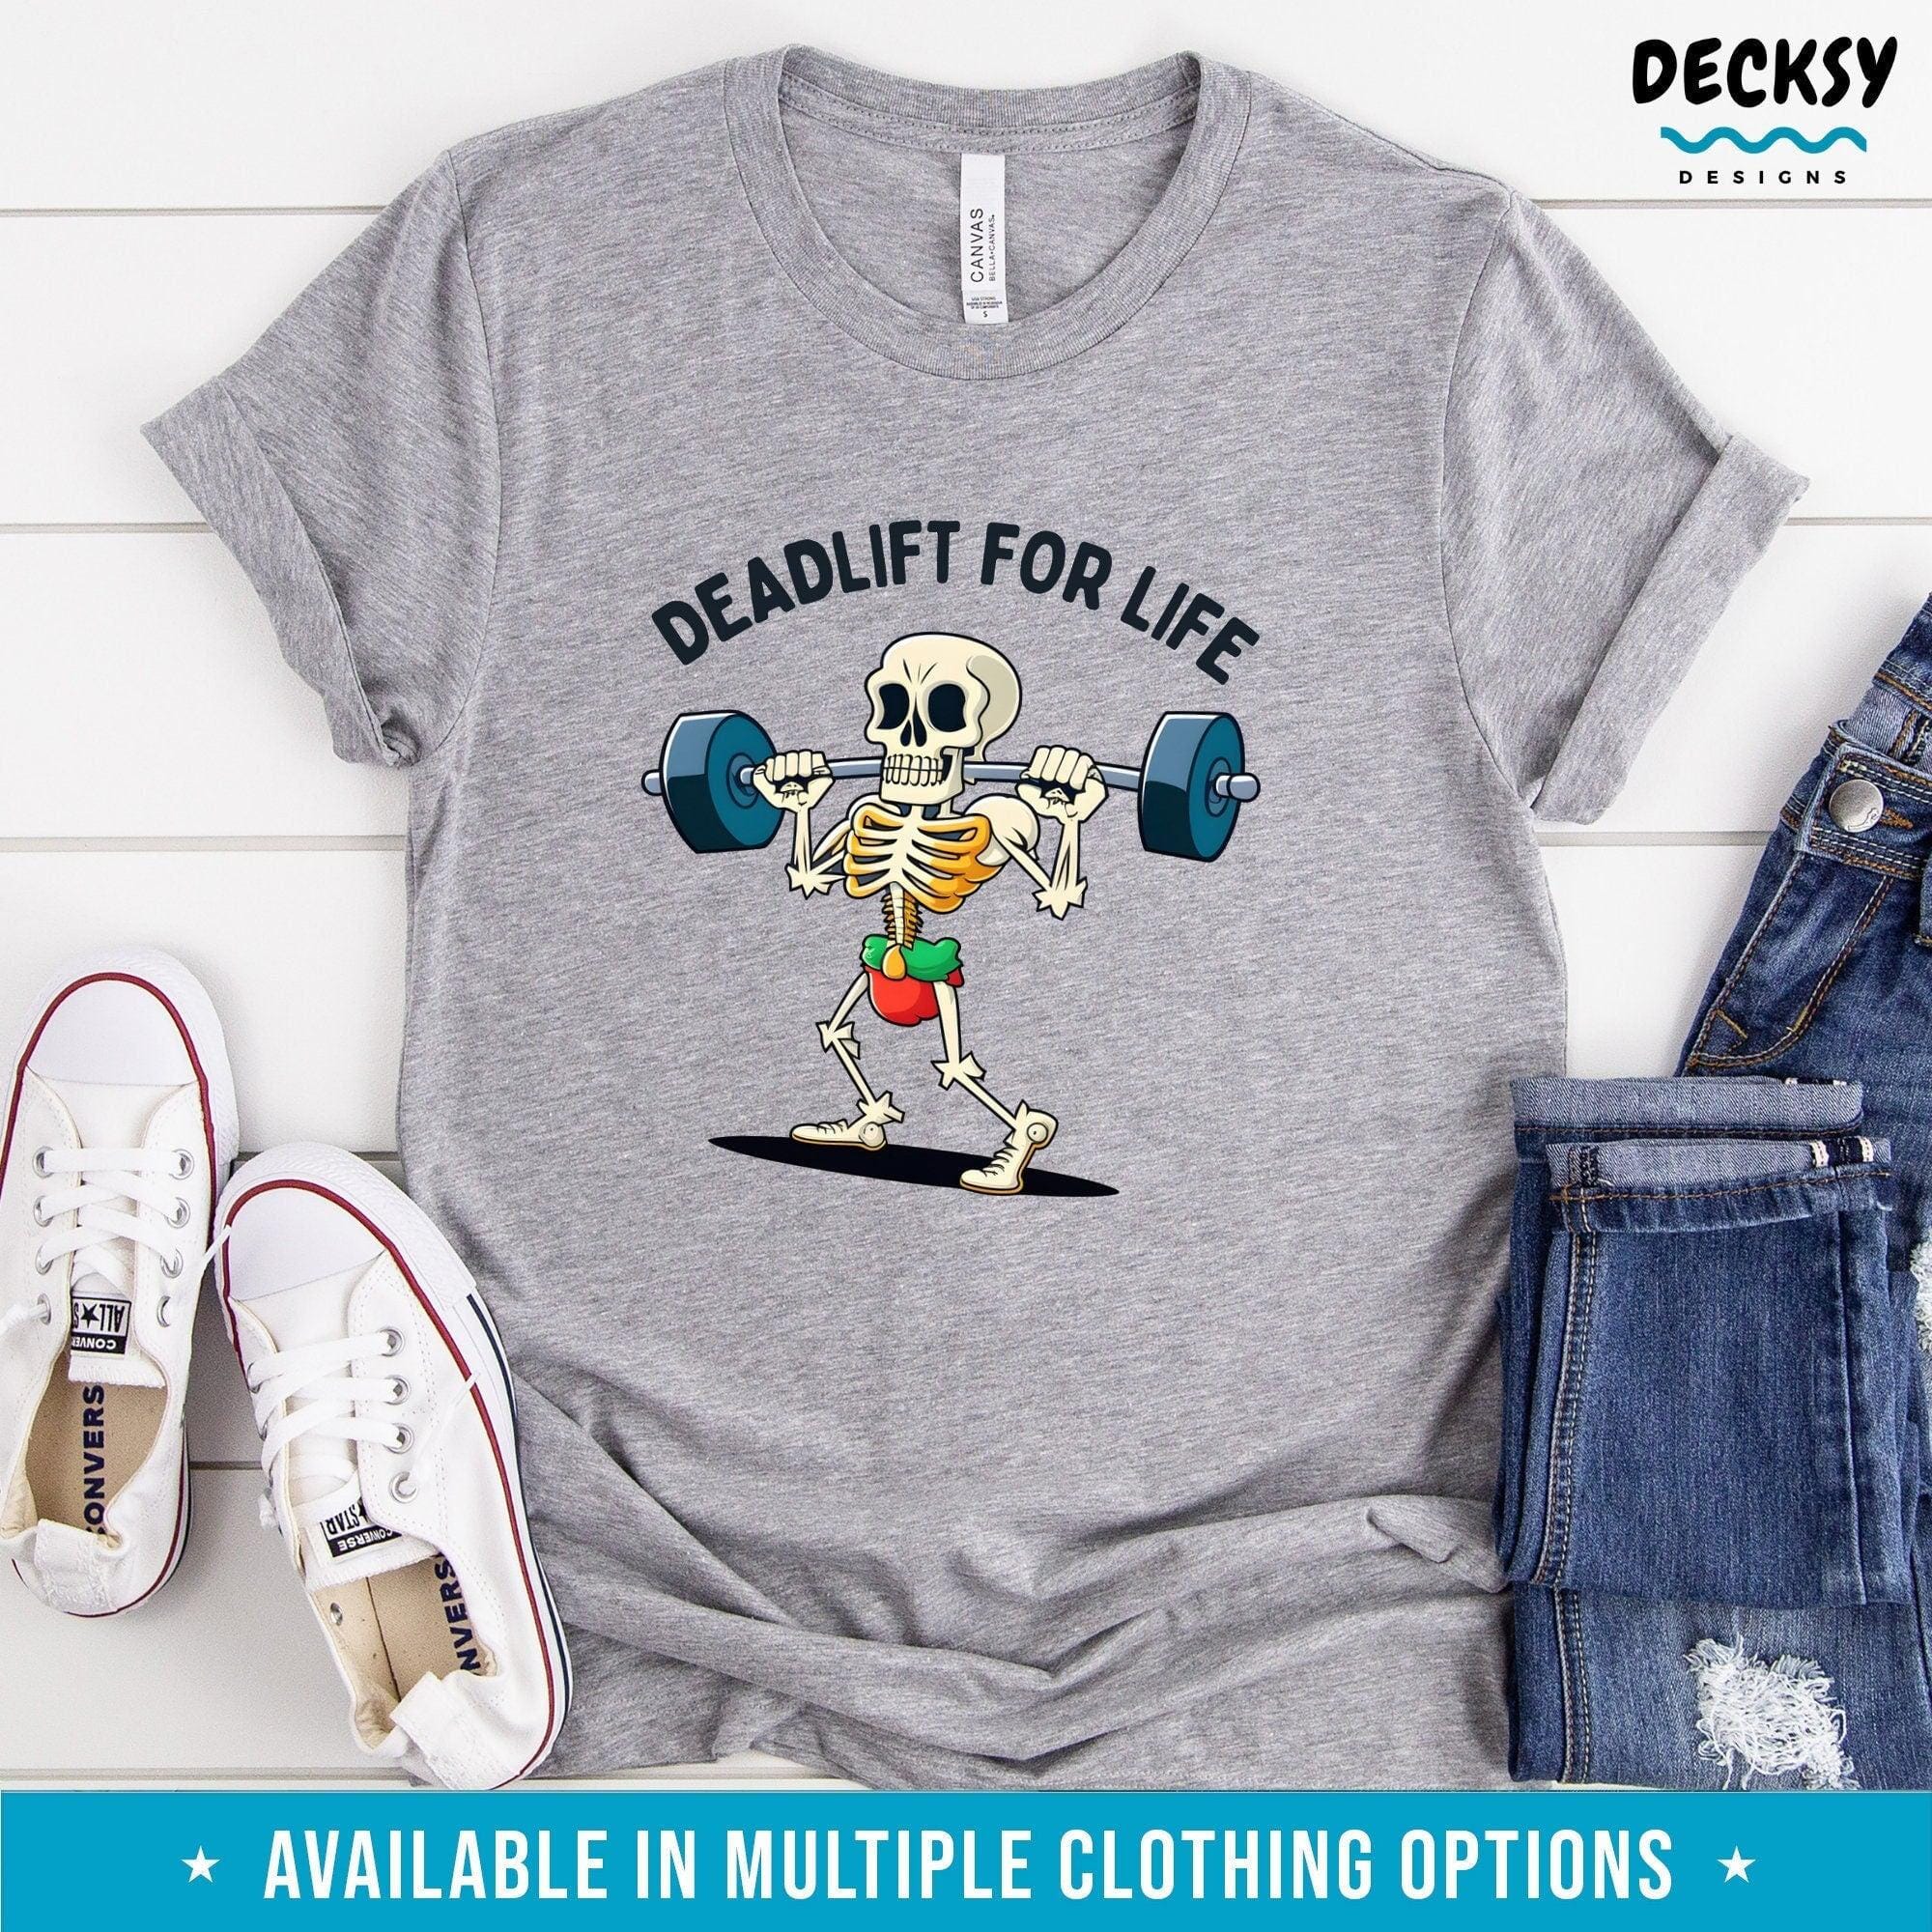 Deadlift Shirt, Weightlifting Gift-Clothing:Gender-Neutral Adult Clothing:Tops & Tees:T-shirts:Graphic Tees-DecksyDesigns